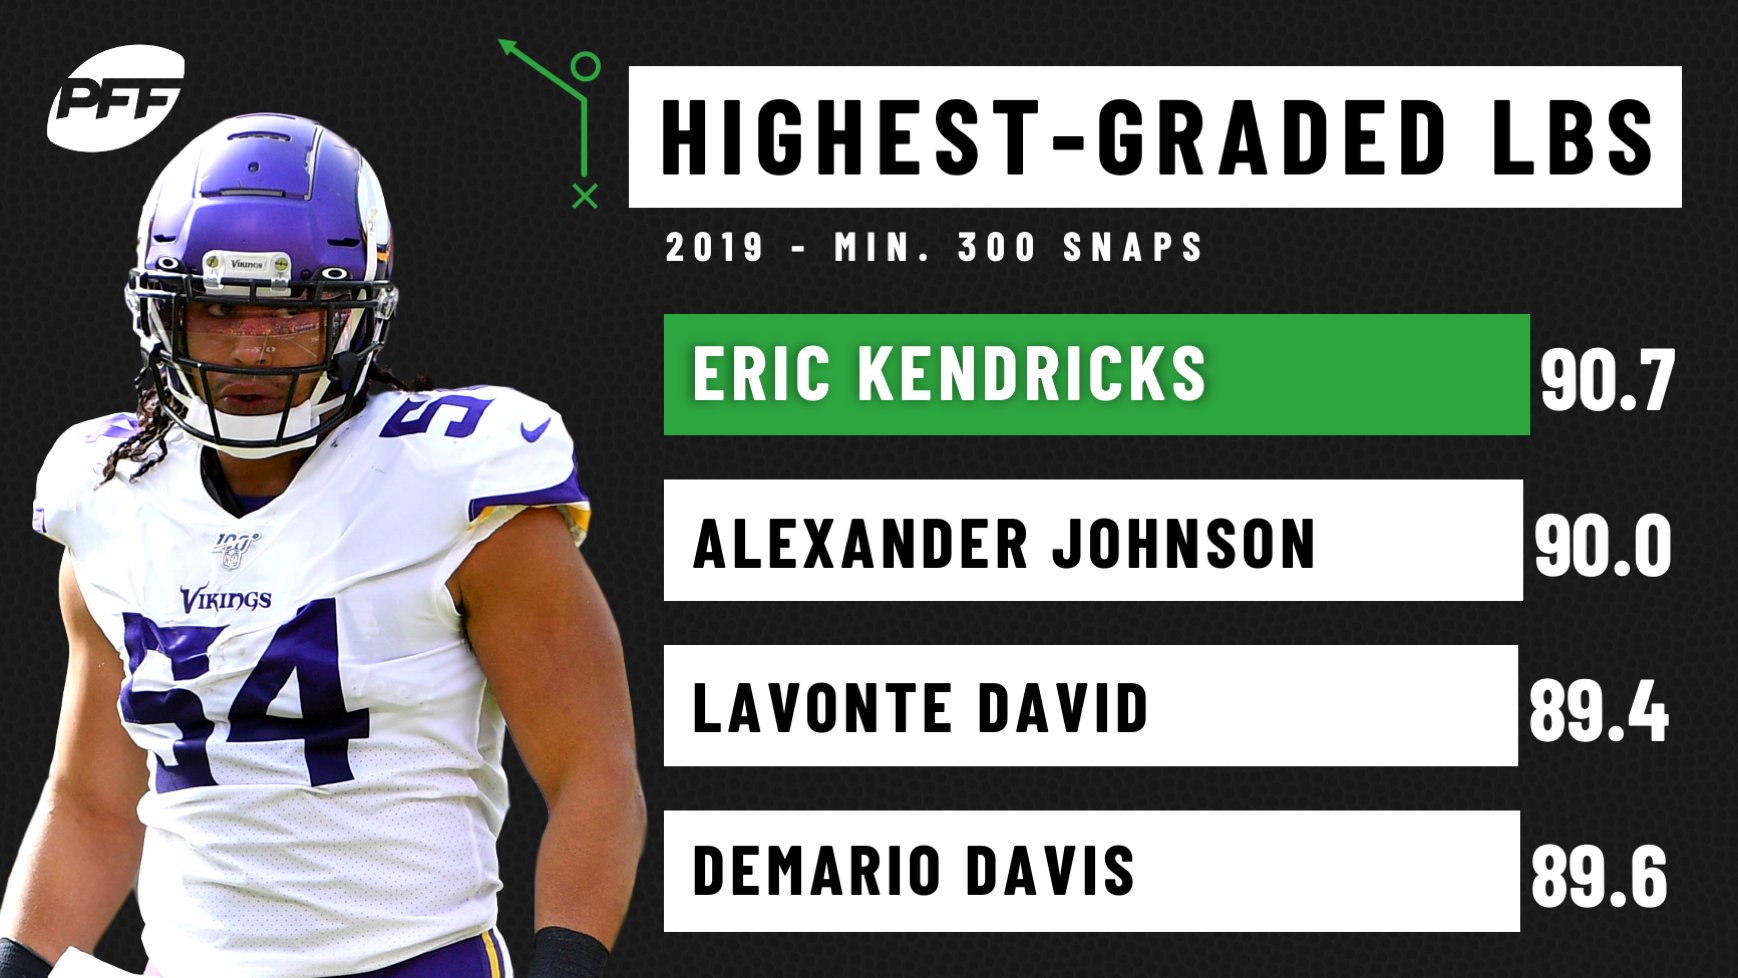 PFF on X: 'The best linebackers in the NFL in 2019.